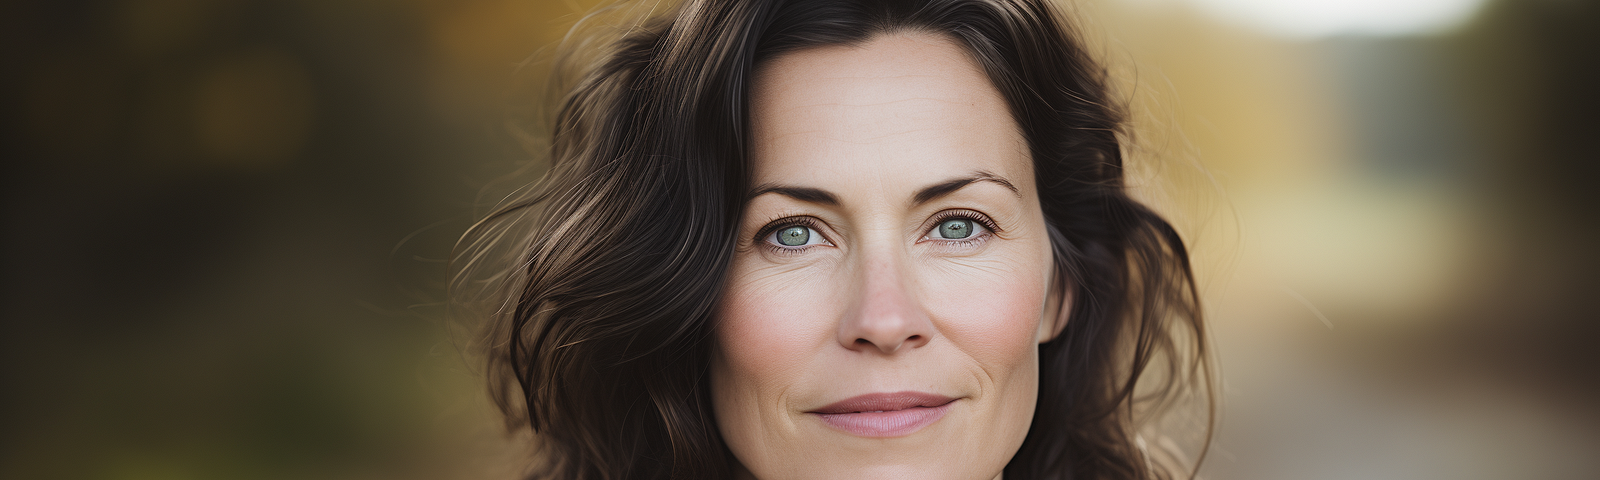 a middle-aged woman, brunette, looking deeply and intently into the camera, stock photo, bright, airy